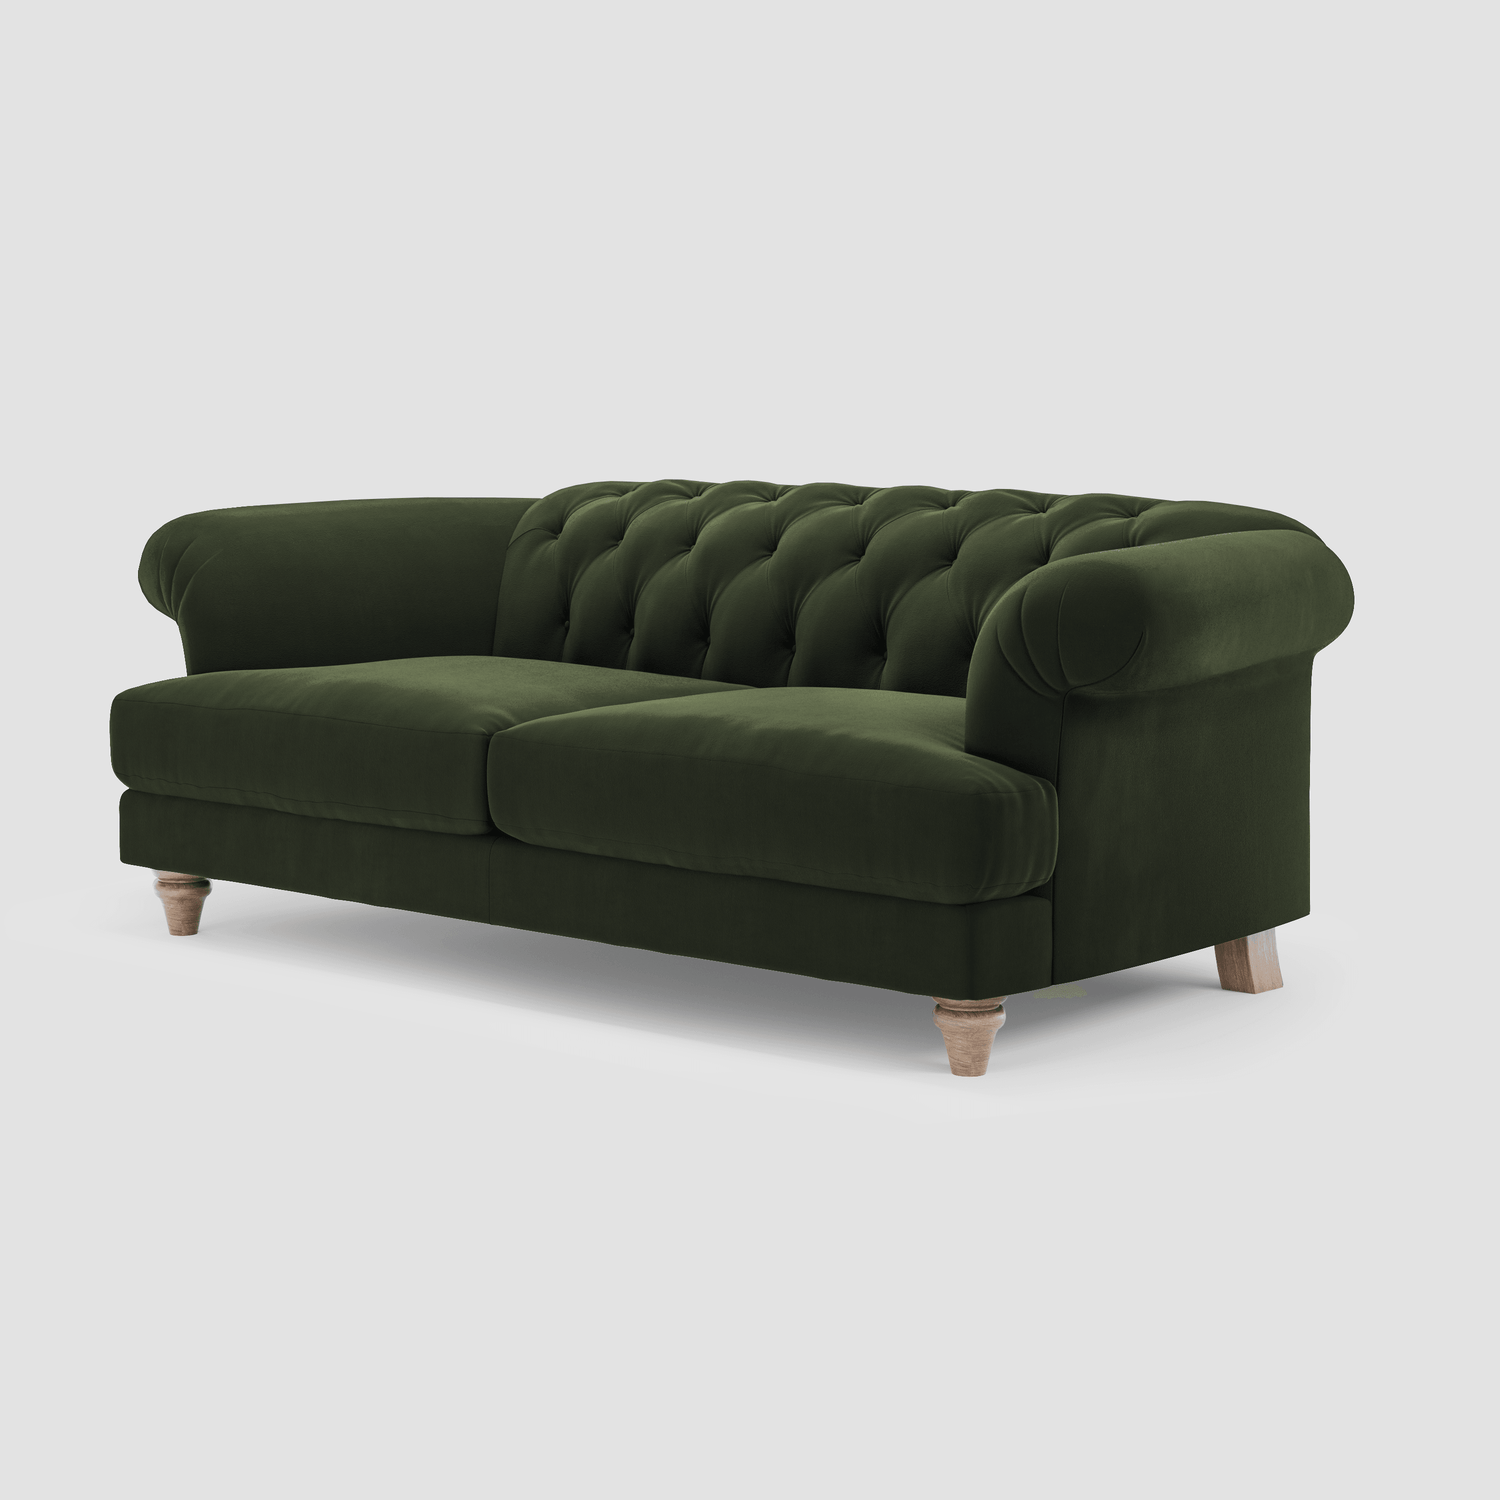 Kimber Two Seater Sofa - Flown the Coop